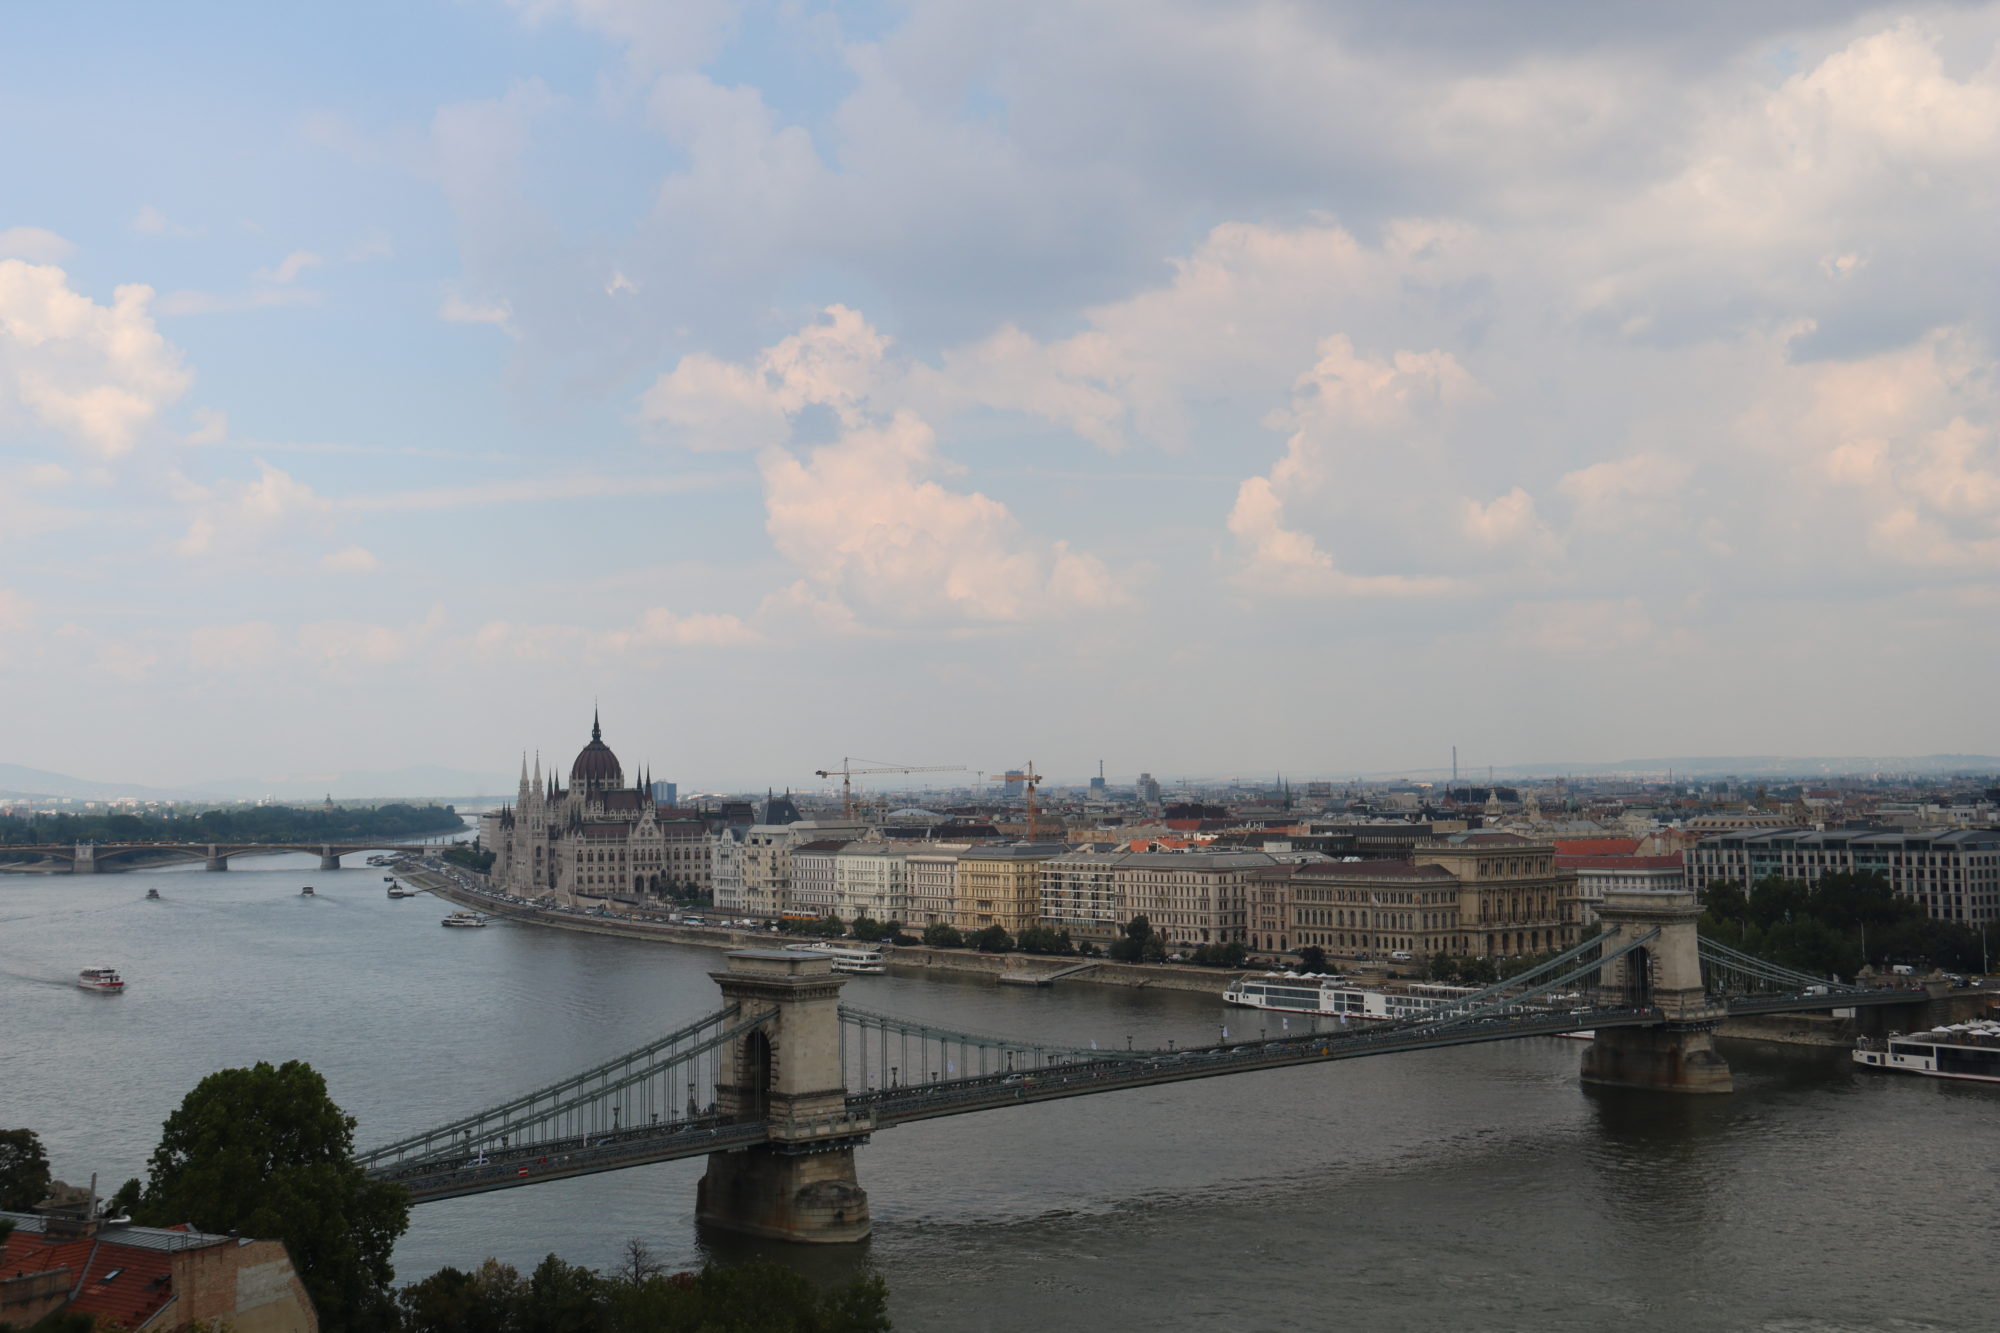 image of Budapest Parliament and Chain Bridge which we saw often during our Budapest Itinerary